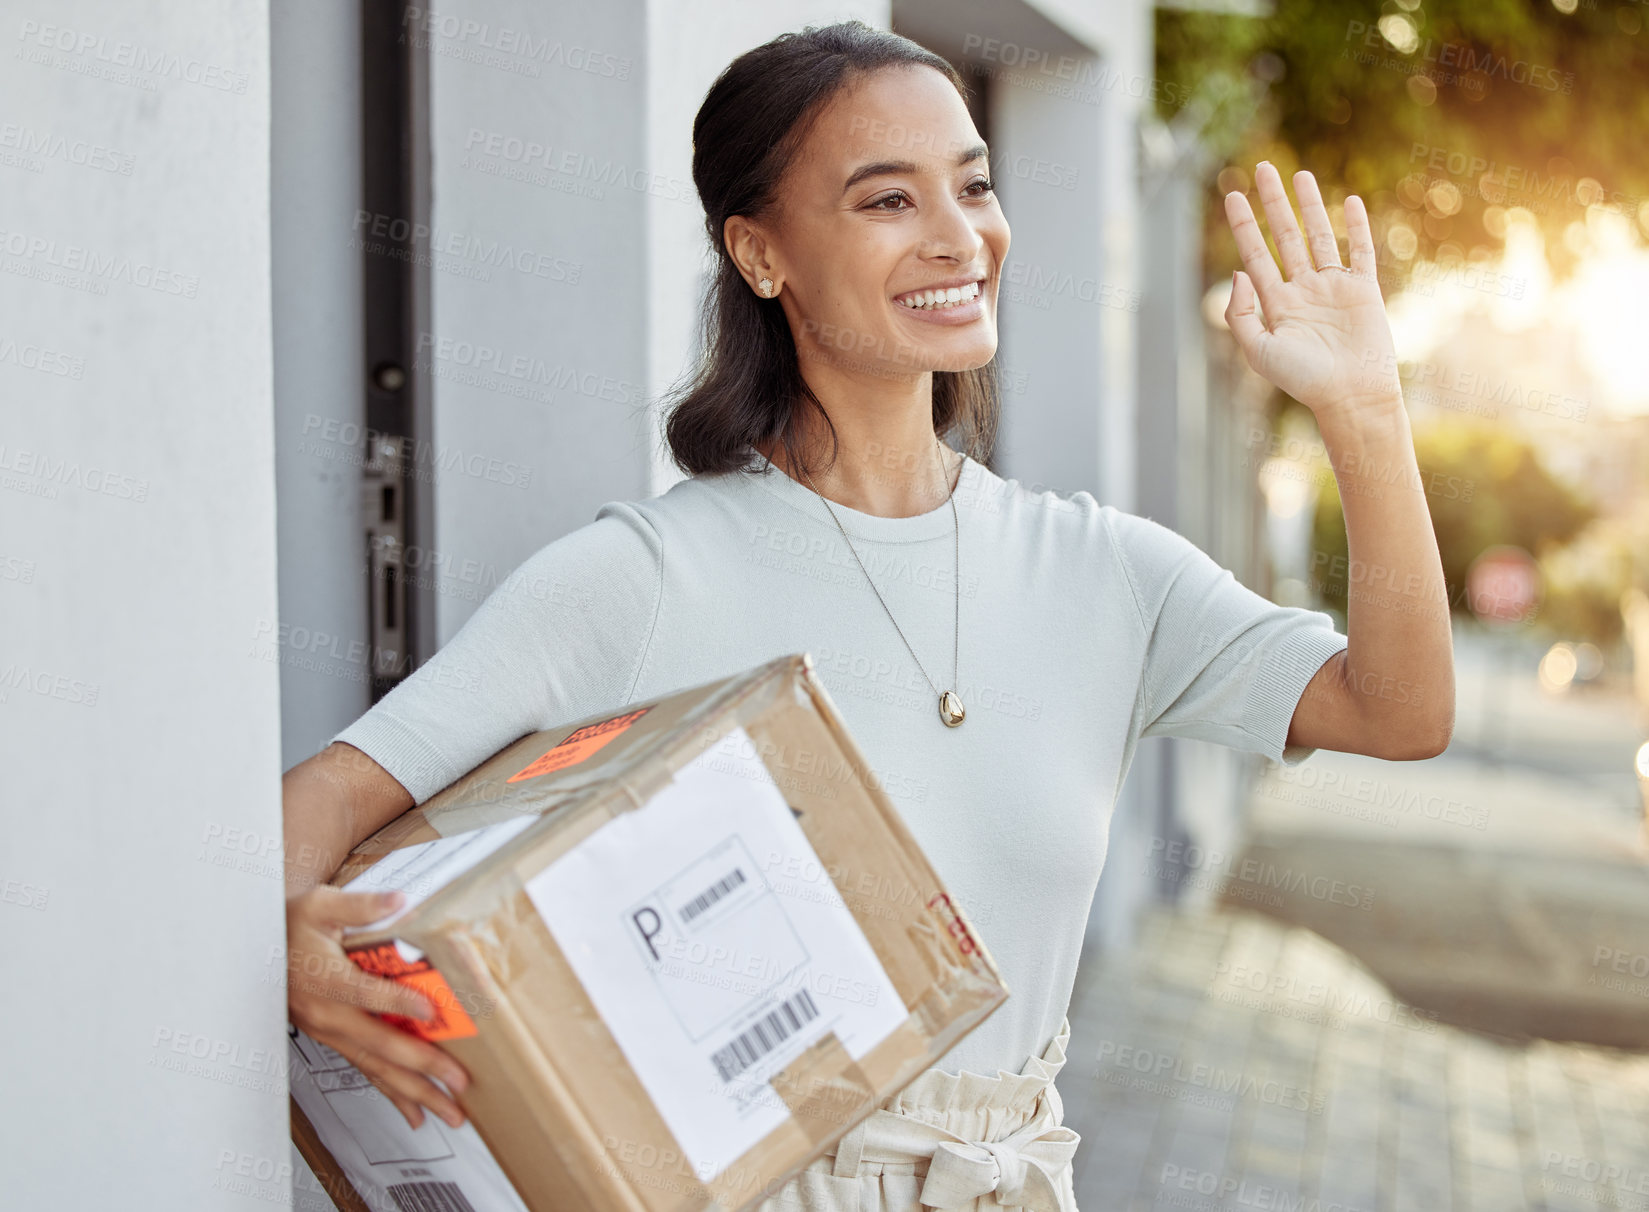 Buy stock photo Shot of a young woman waving to her delivery man after receiving a package